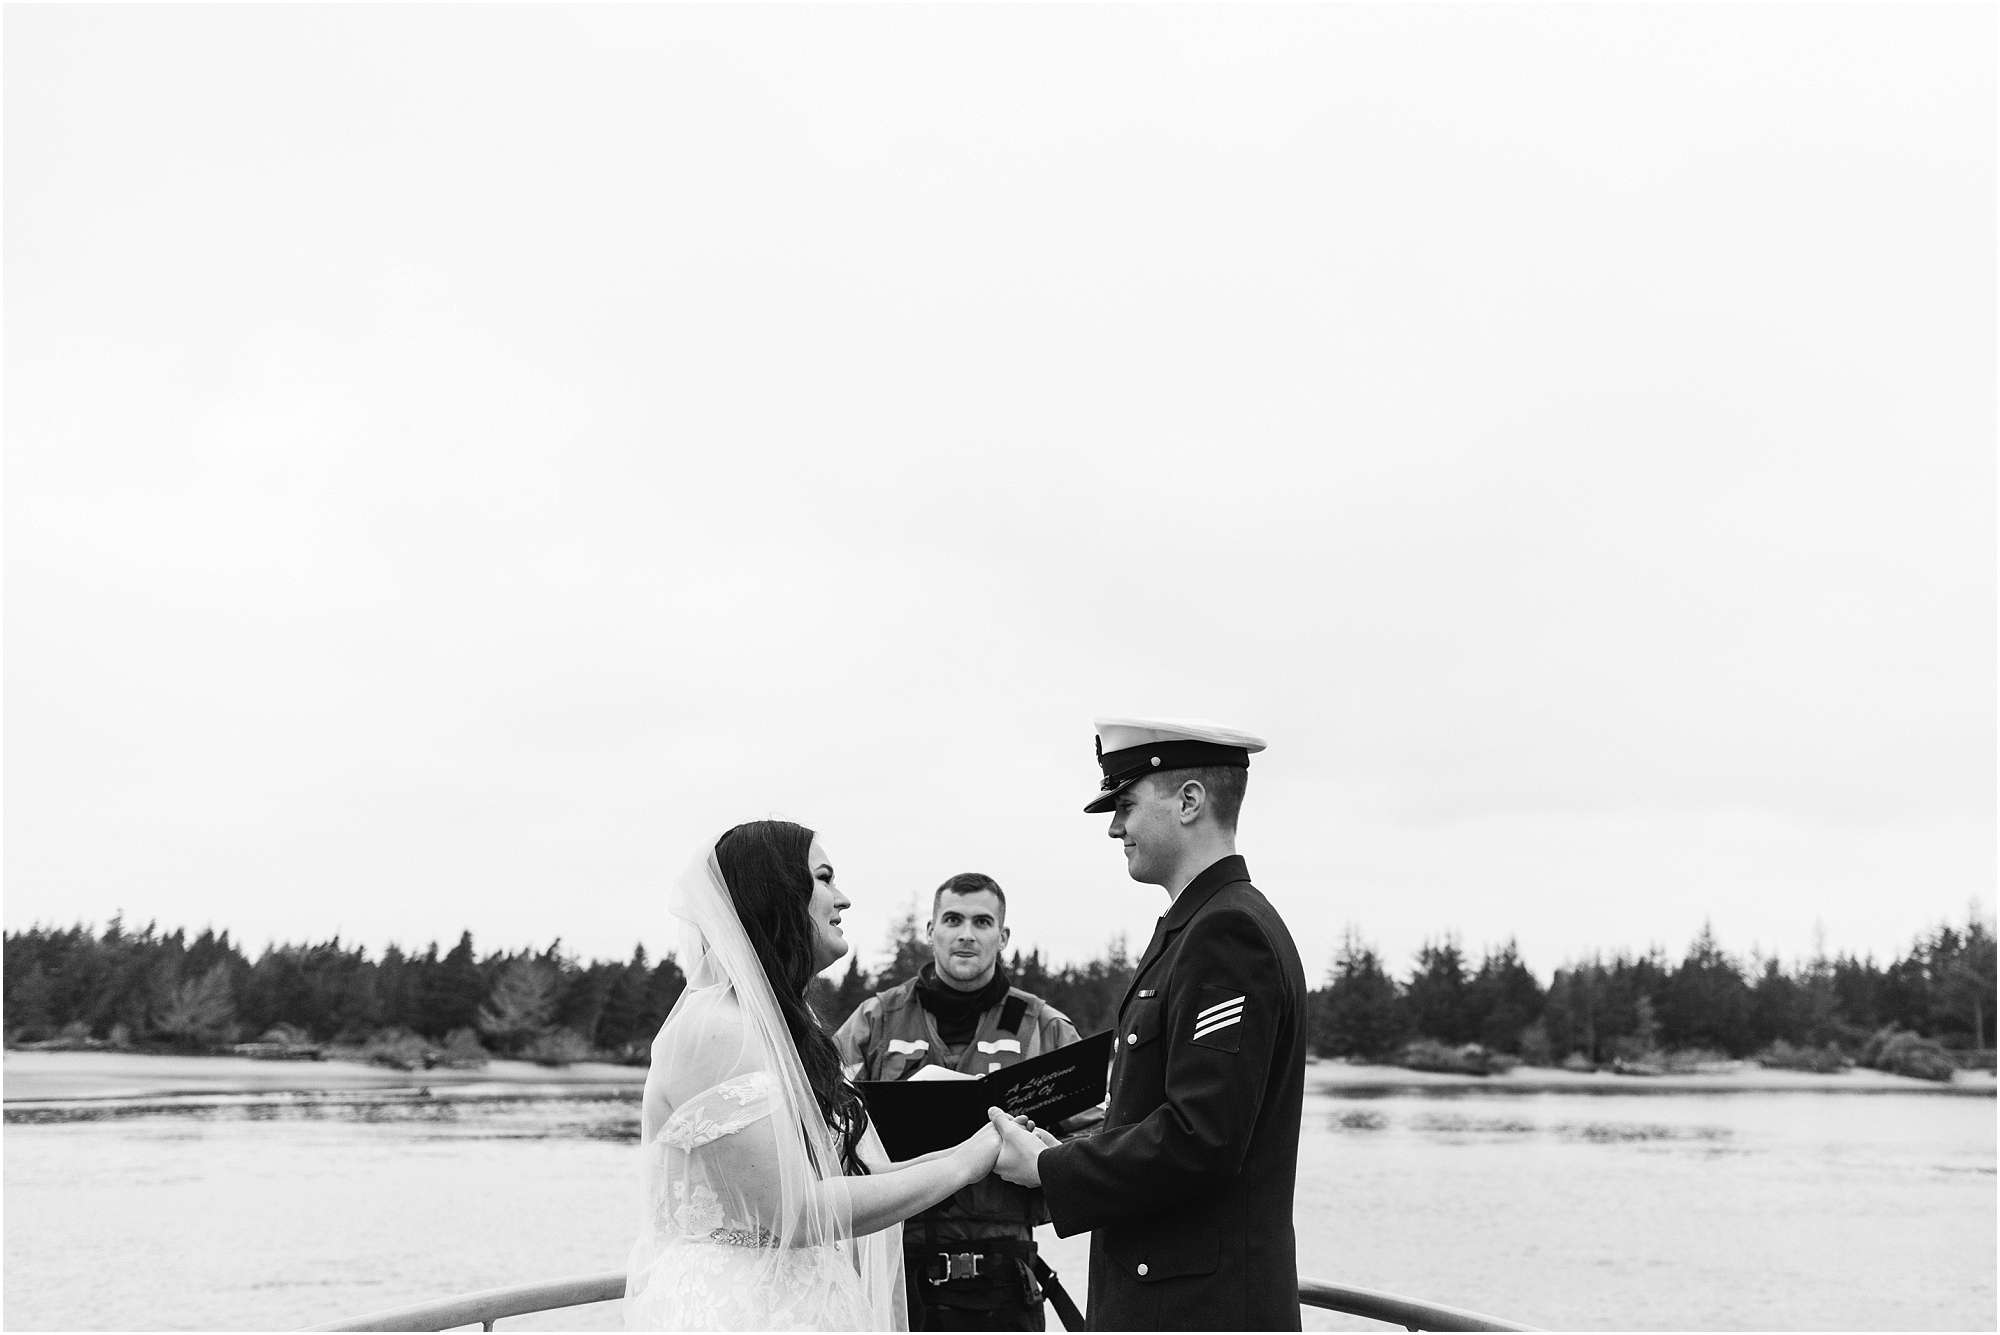 An Oregon Coast Guard elopement, officiated on the deck of the ship in Winchester Bay, Oregon with a groom wearing his navy Coast Guard uniform and a bride wearing a blush pink gown and white veil. | Erica Swantek Photography